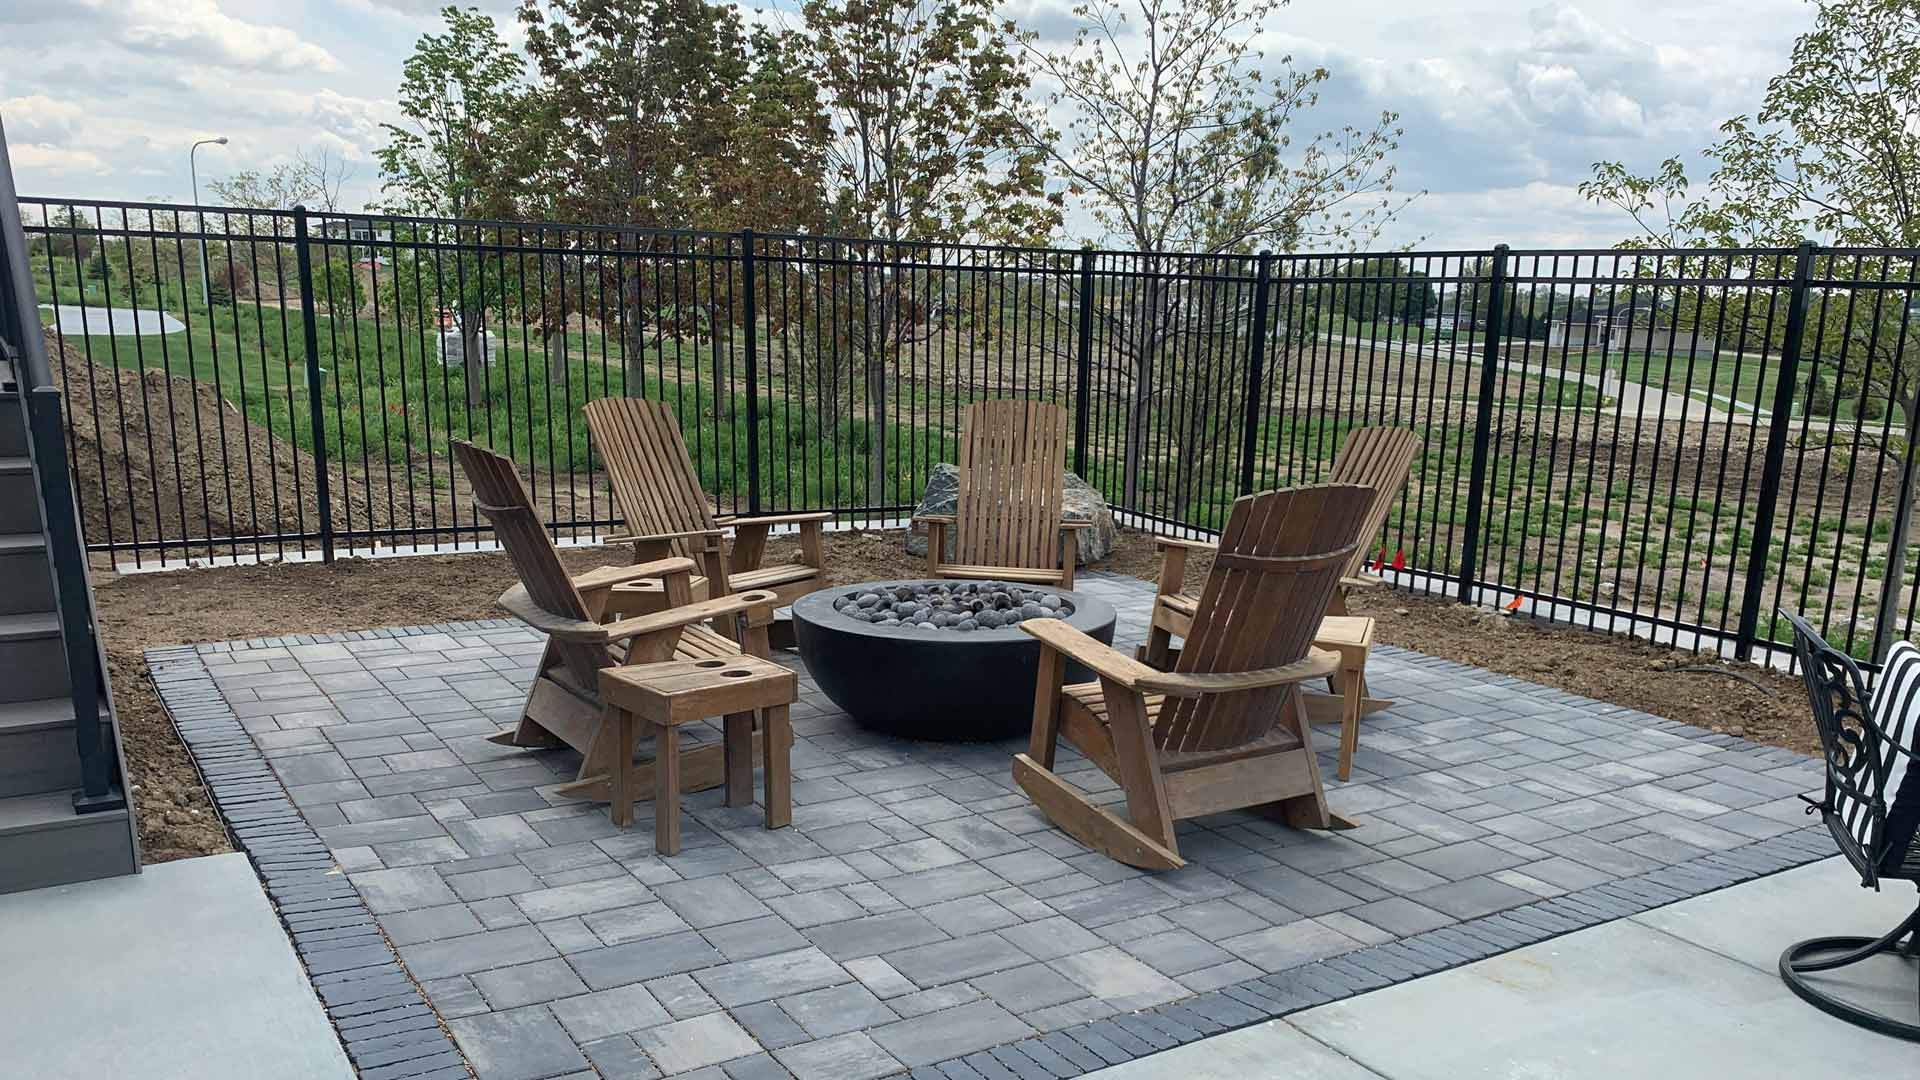 Fire pit and patio hardscape installed for backyard in Omaha, NE.